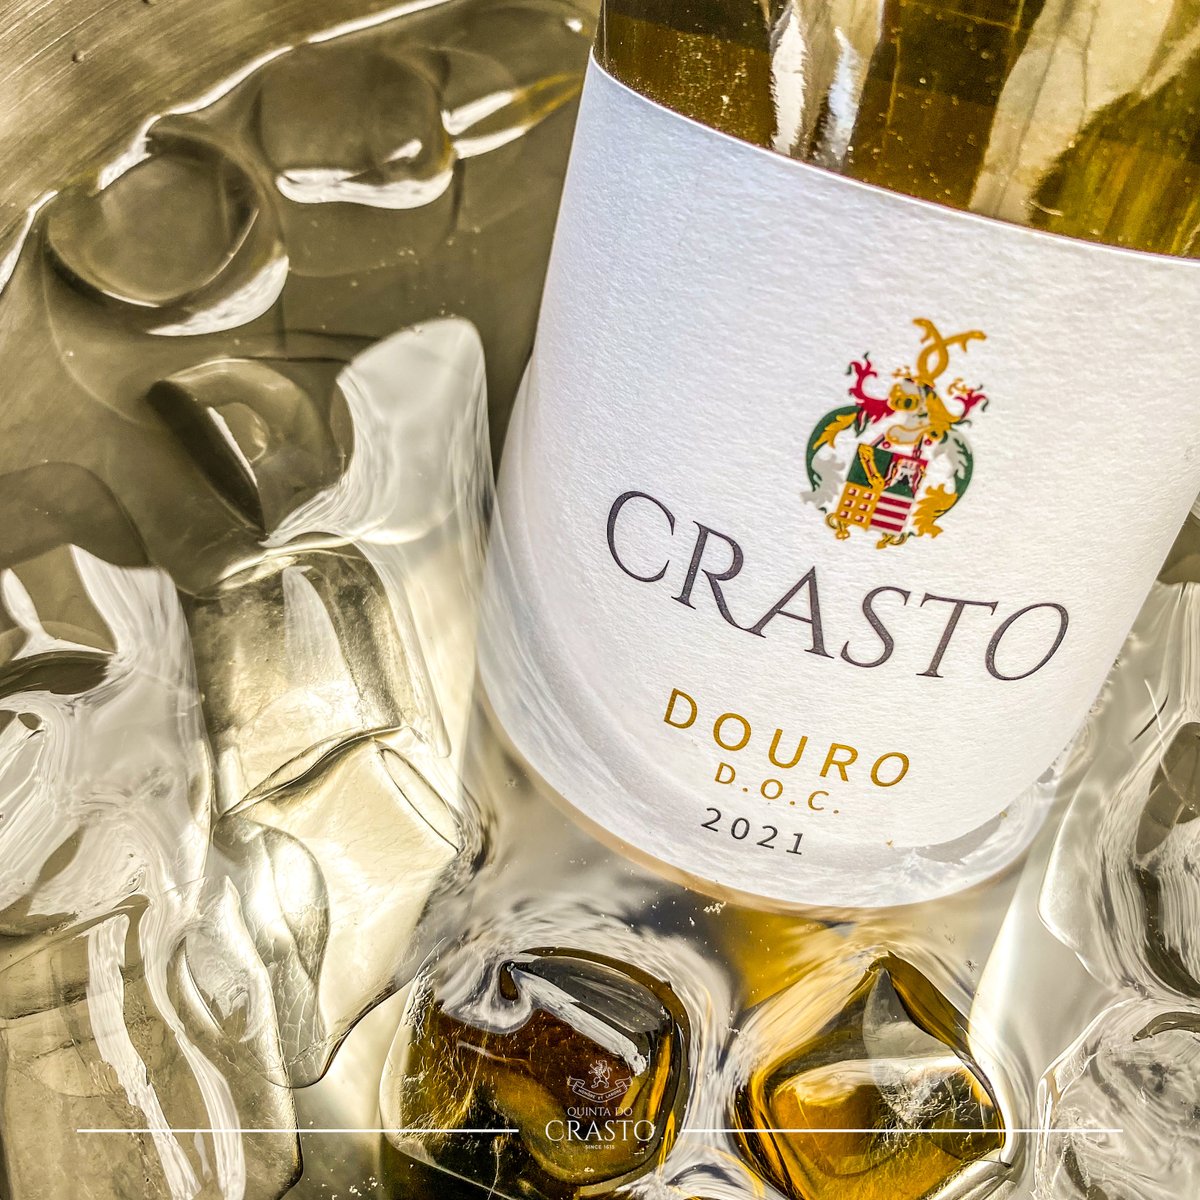 Pale lemon in colour. Expressive on the nose, showing fresh citrus fruit aromas and elegant notes of orange blossom. The appealing palate offers excellent volume and an elegant texture, with vibrant notes of minerality standing out. The finish is engaging, fresh and persistent.